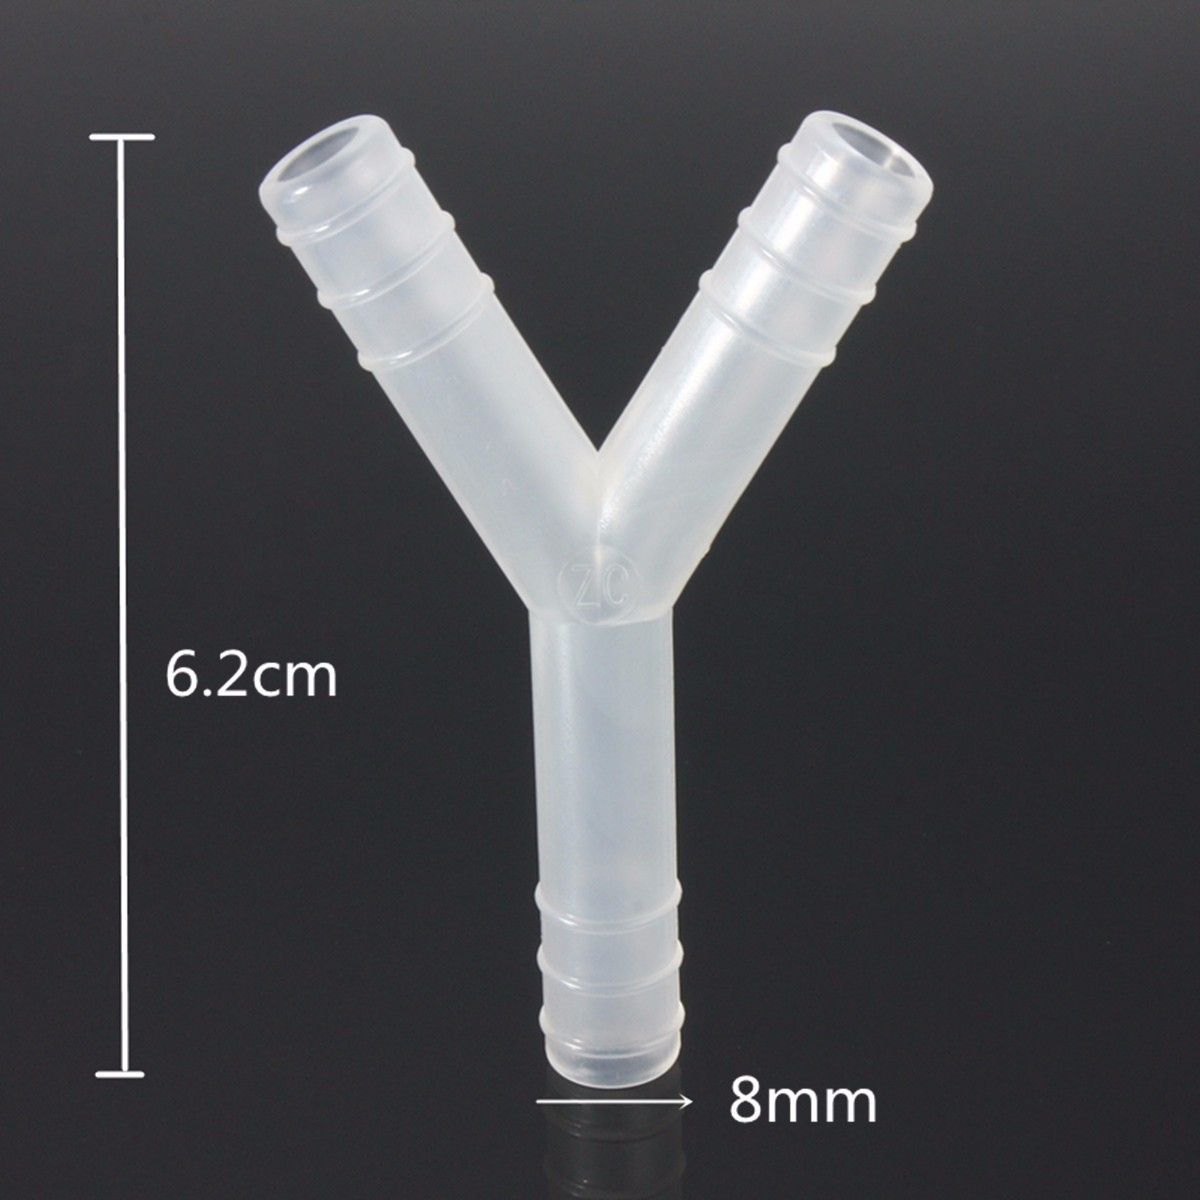 1pcs-Y-Shape-Plastic-Hose-Pipe-Coupler-Connector-Joiner-Fitting-Home-Air-Water-Fuel-1042039